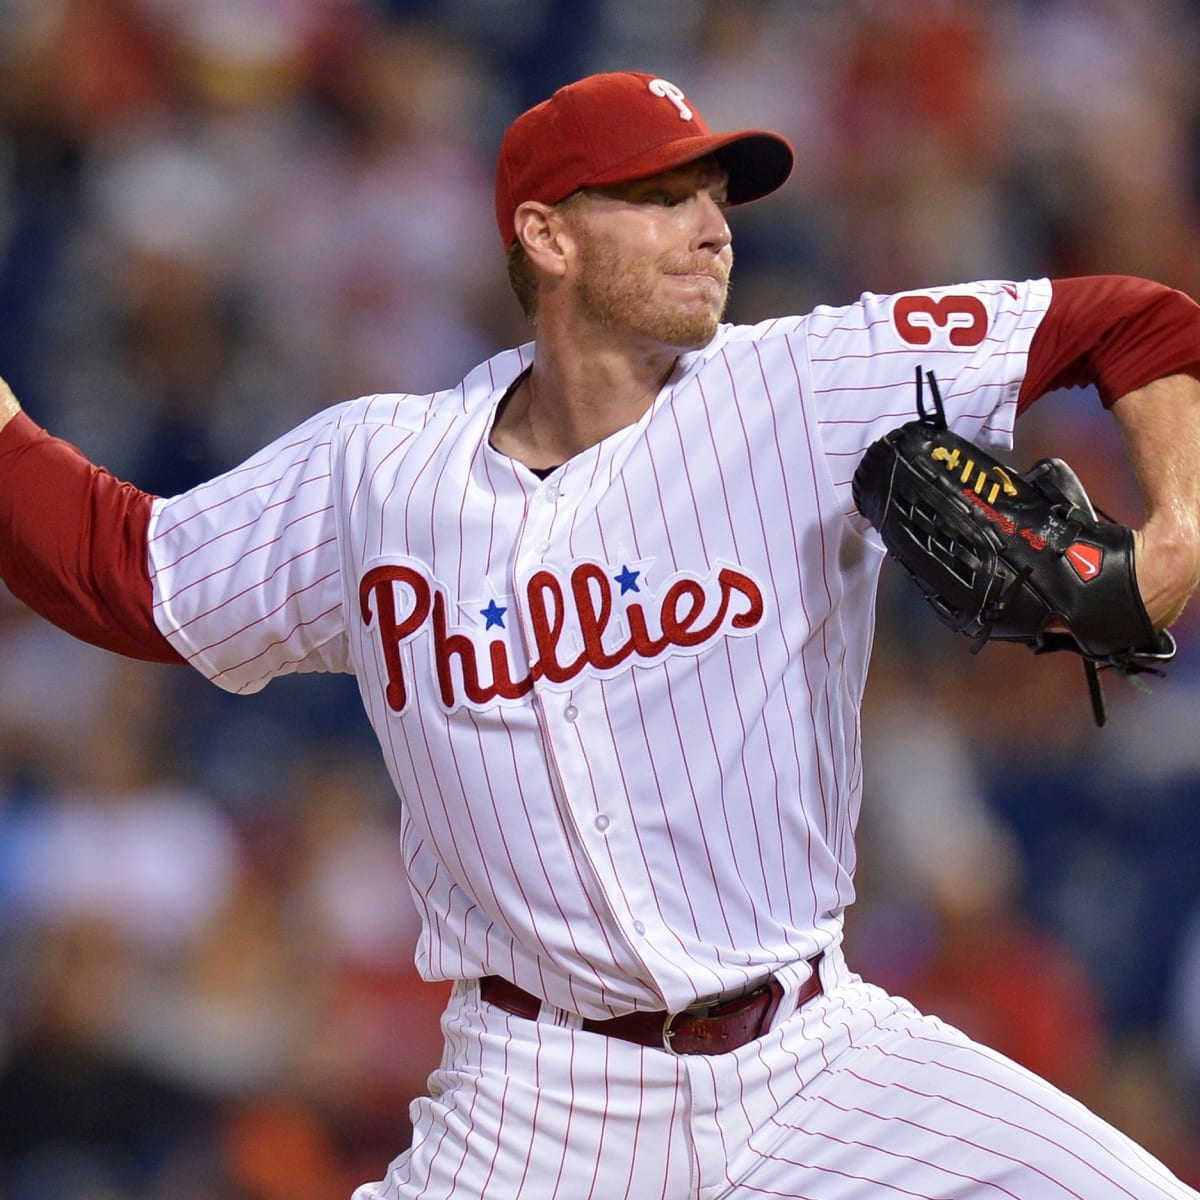 Roy Halladay: Baseball world mourns loss of pitching legend - The